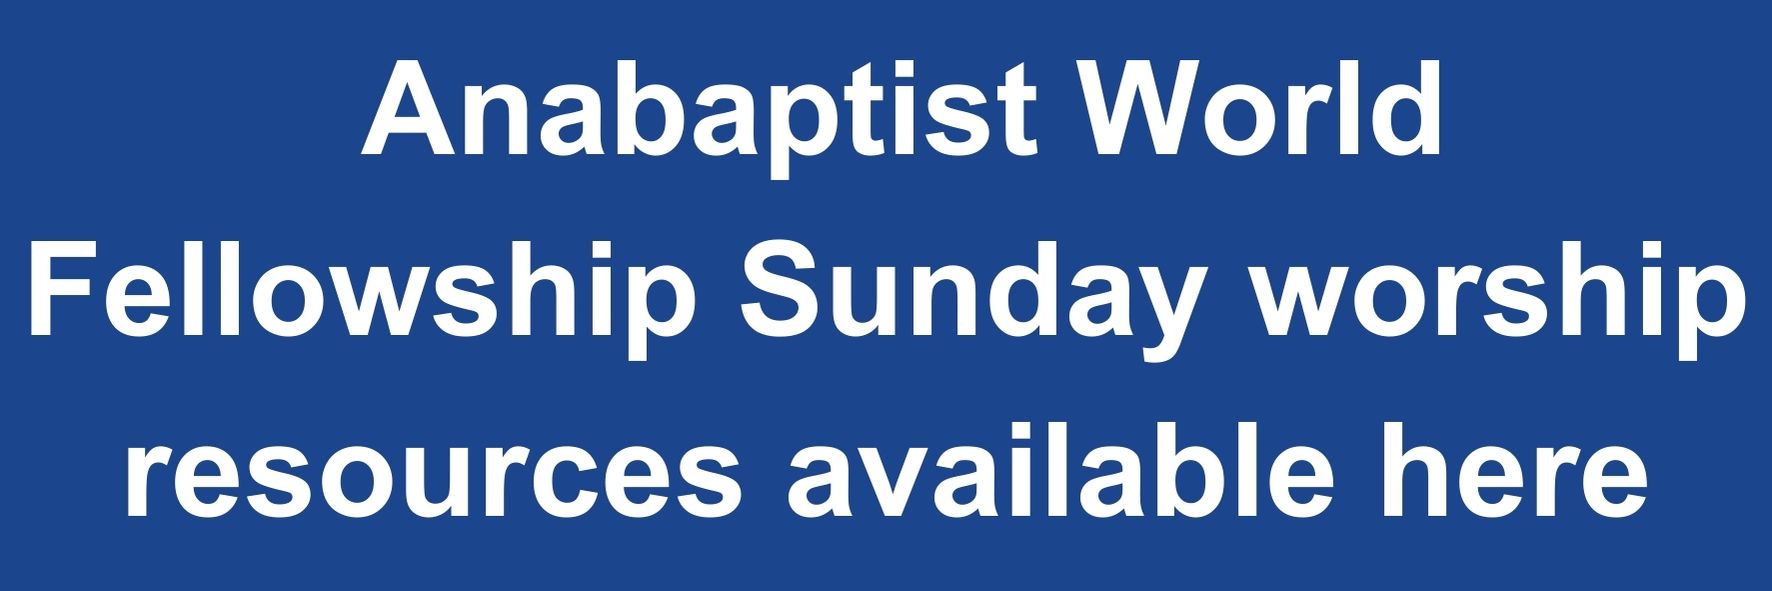 Anabaptist World Fellowship Sunday worship resources available here